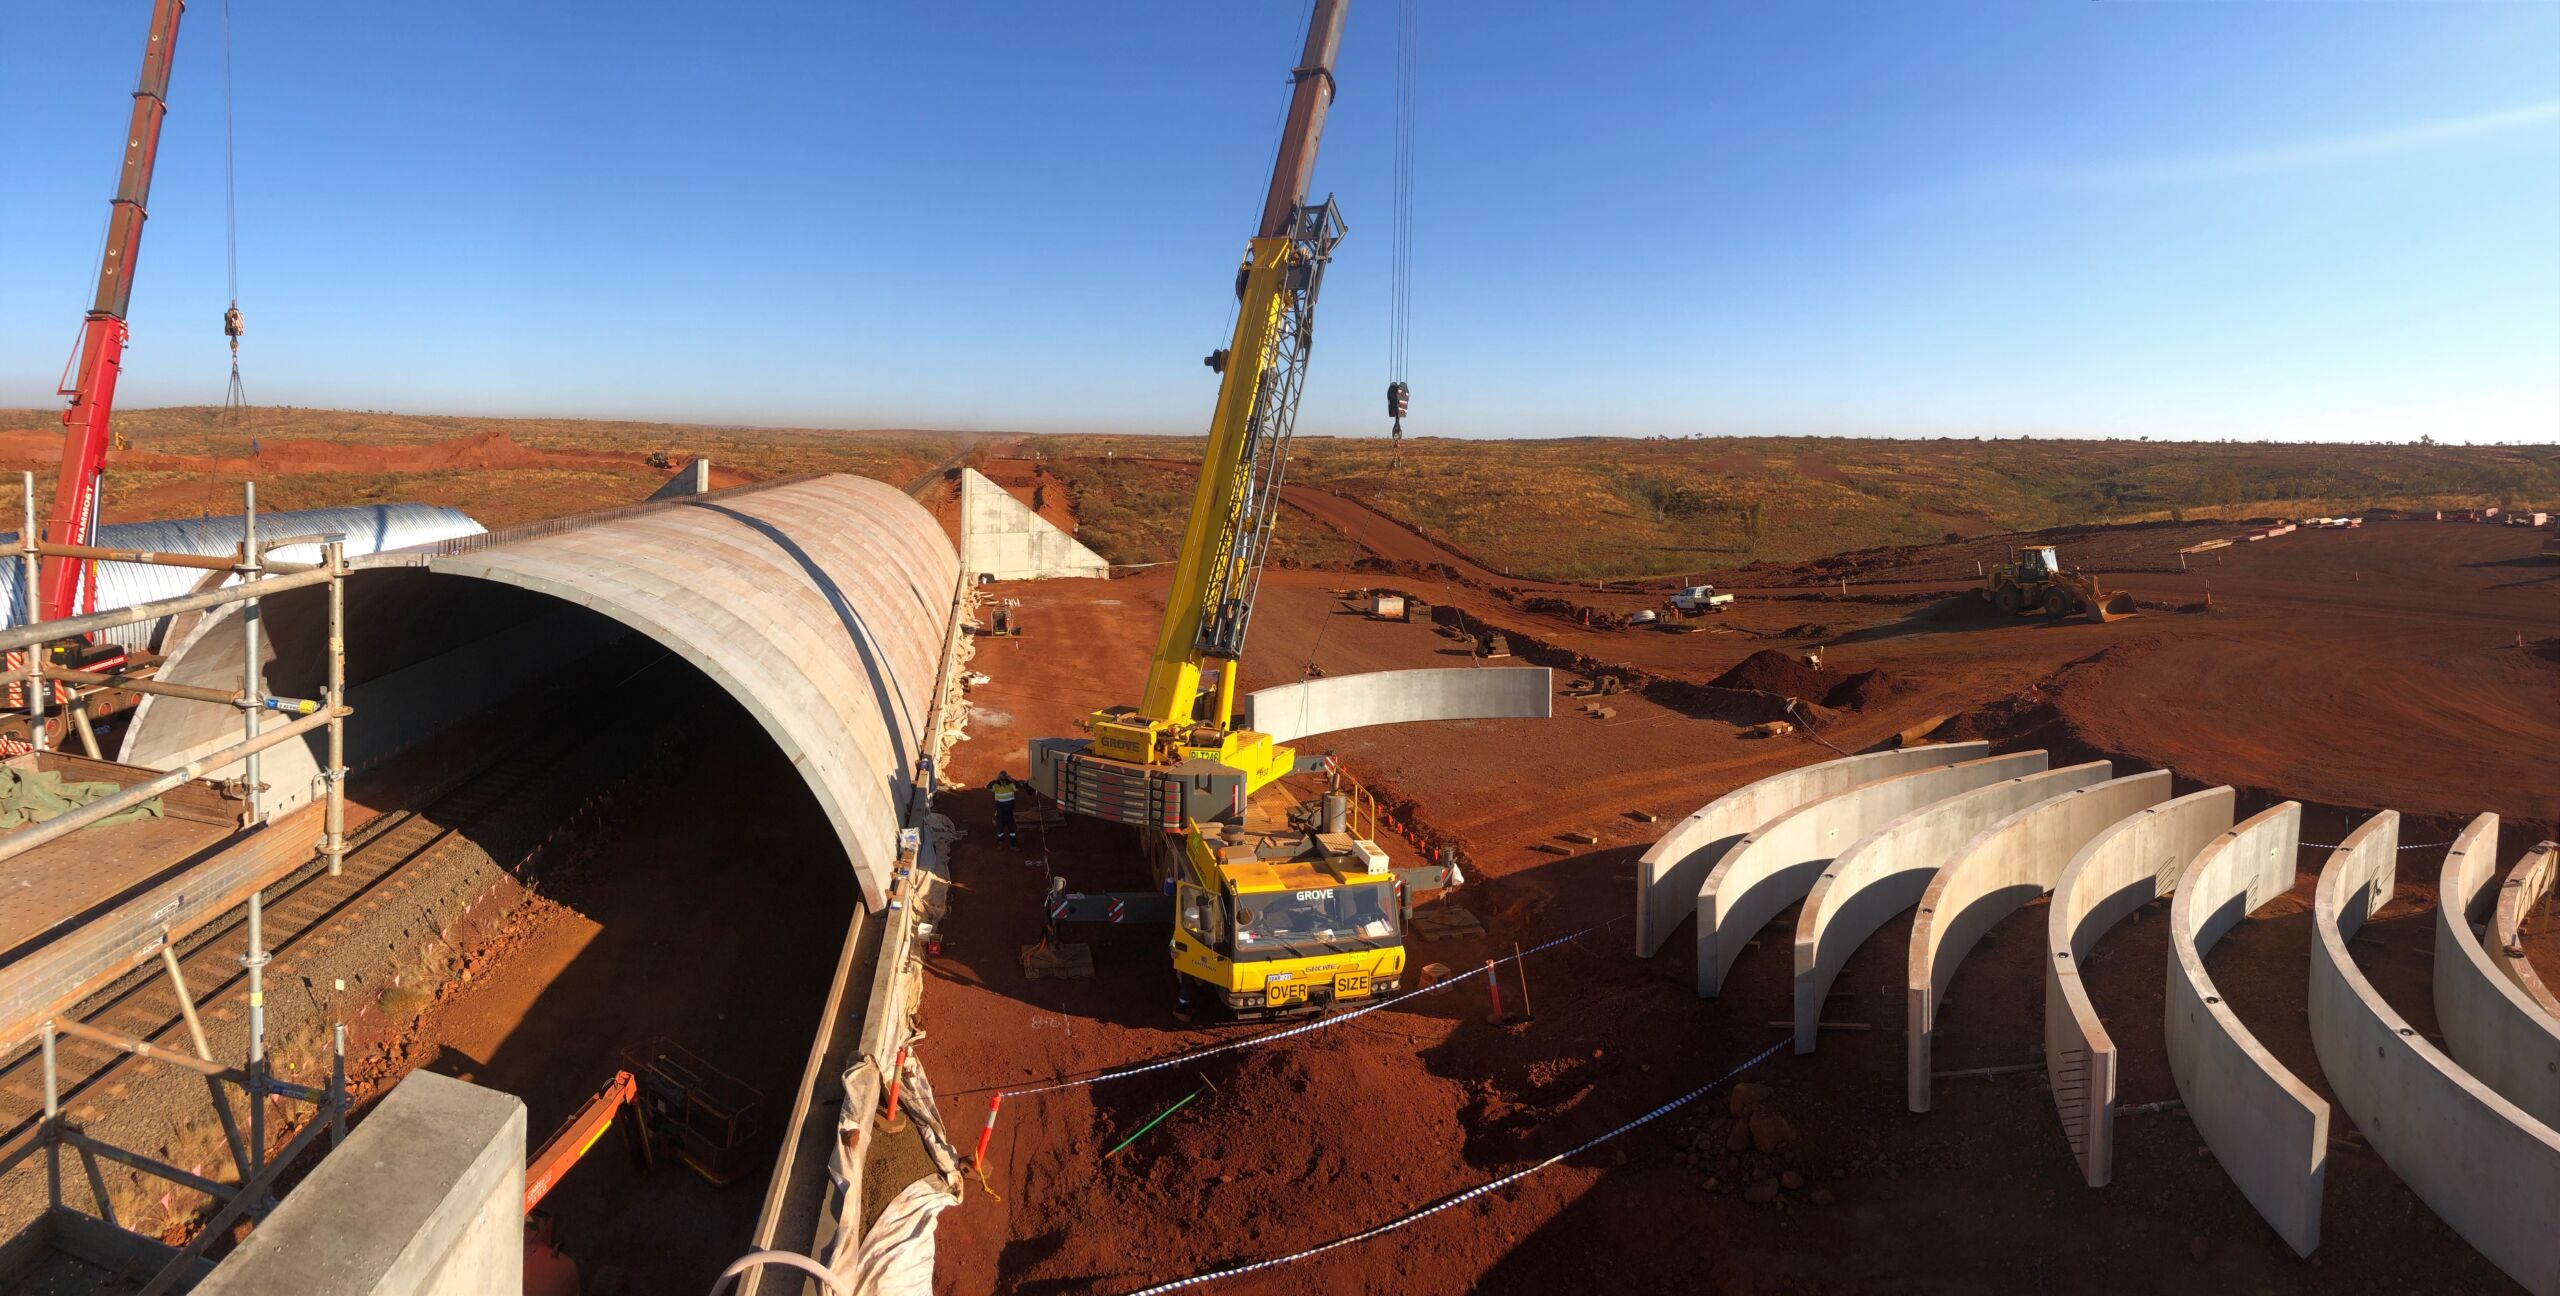 A TechSpan concrete precast arch being installed at a mining site in Western Australia for use as a tunnel.